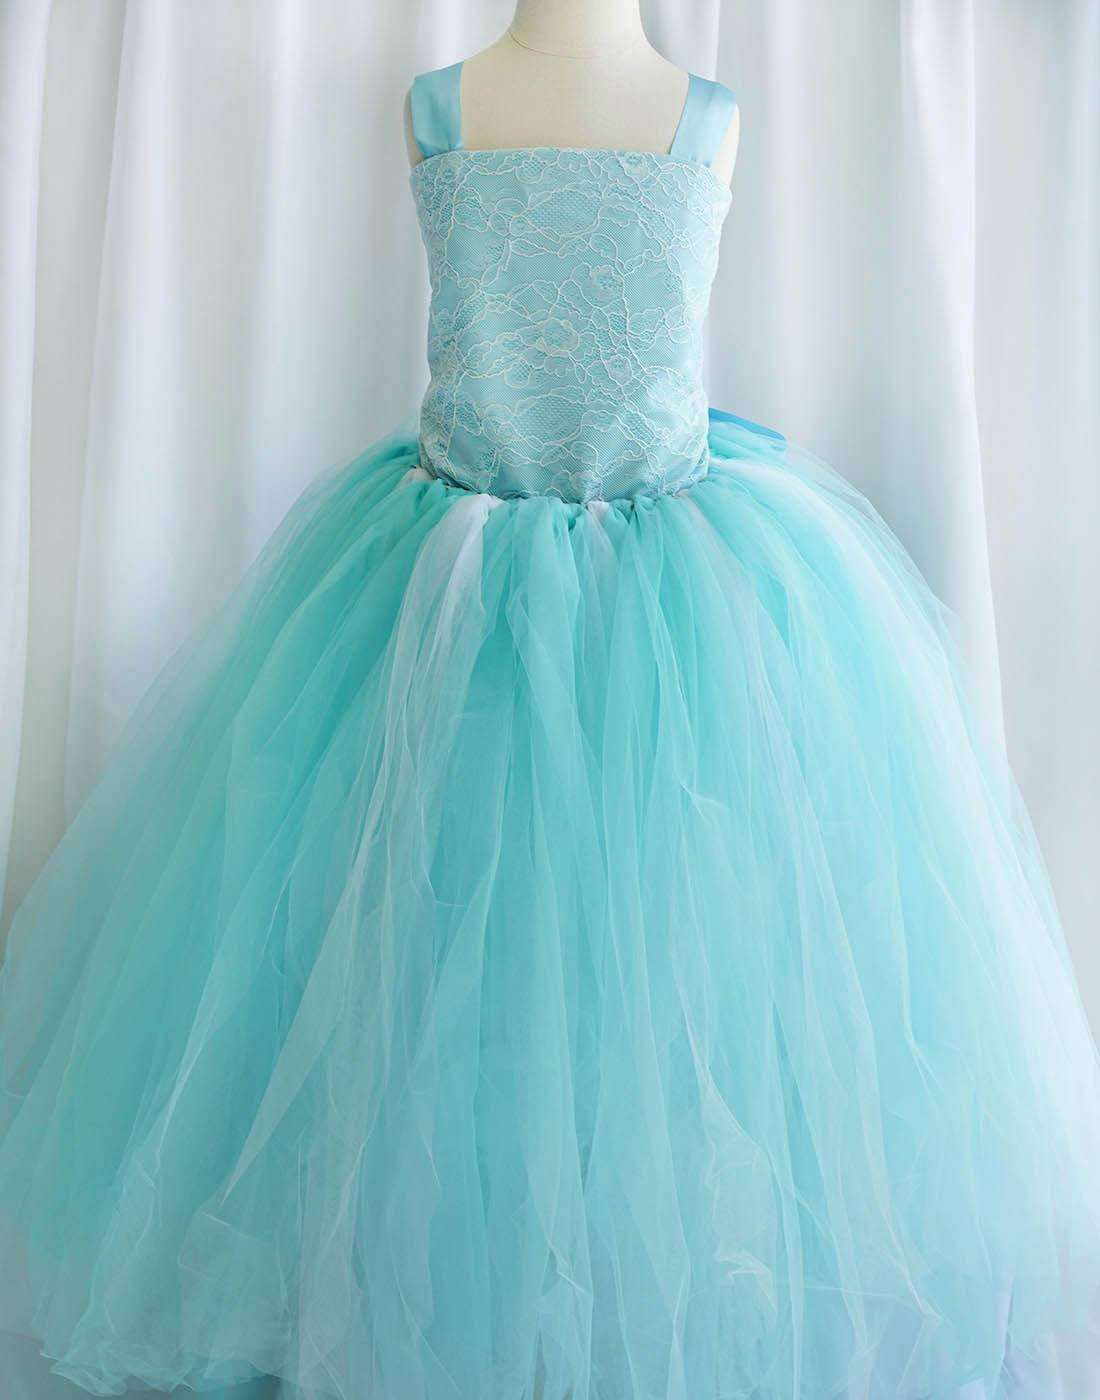 turquoise occasion dress